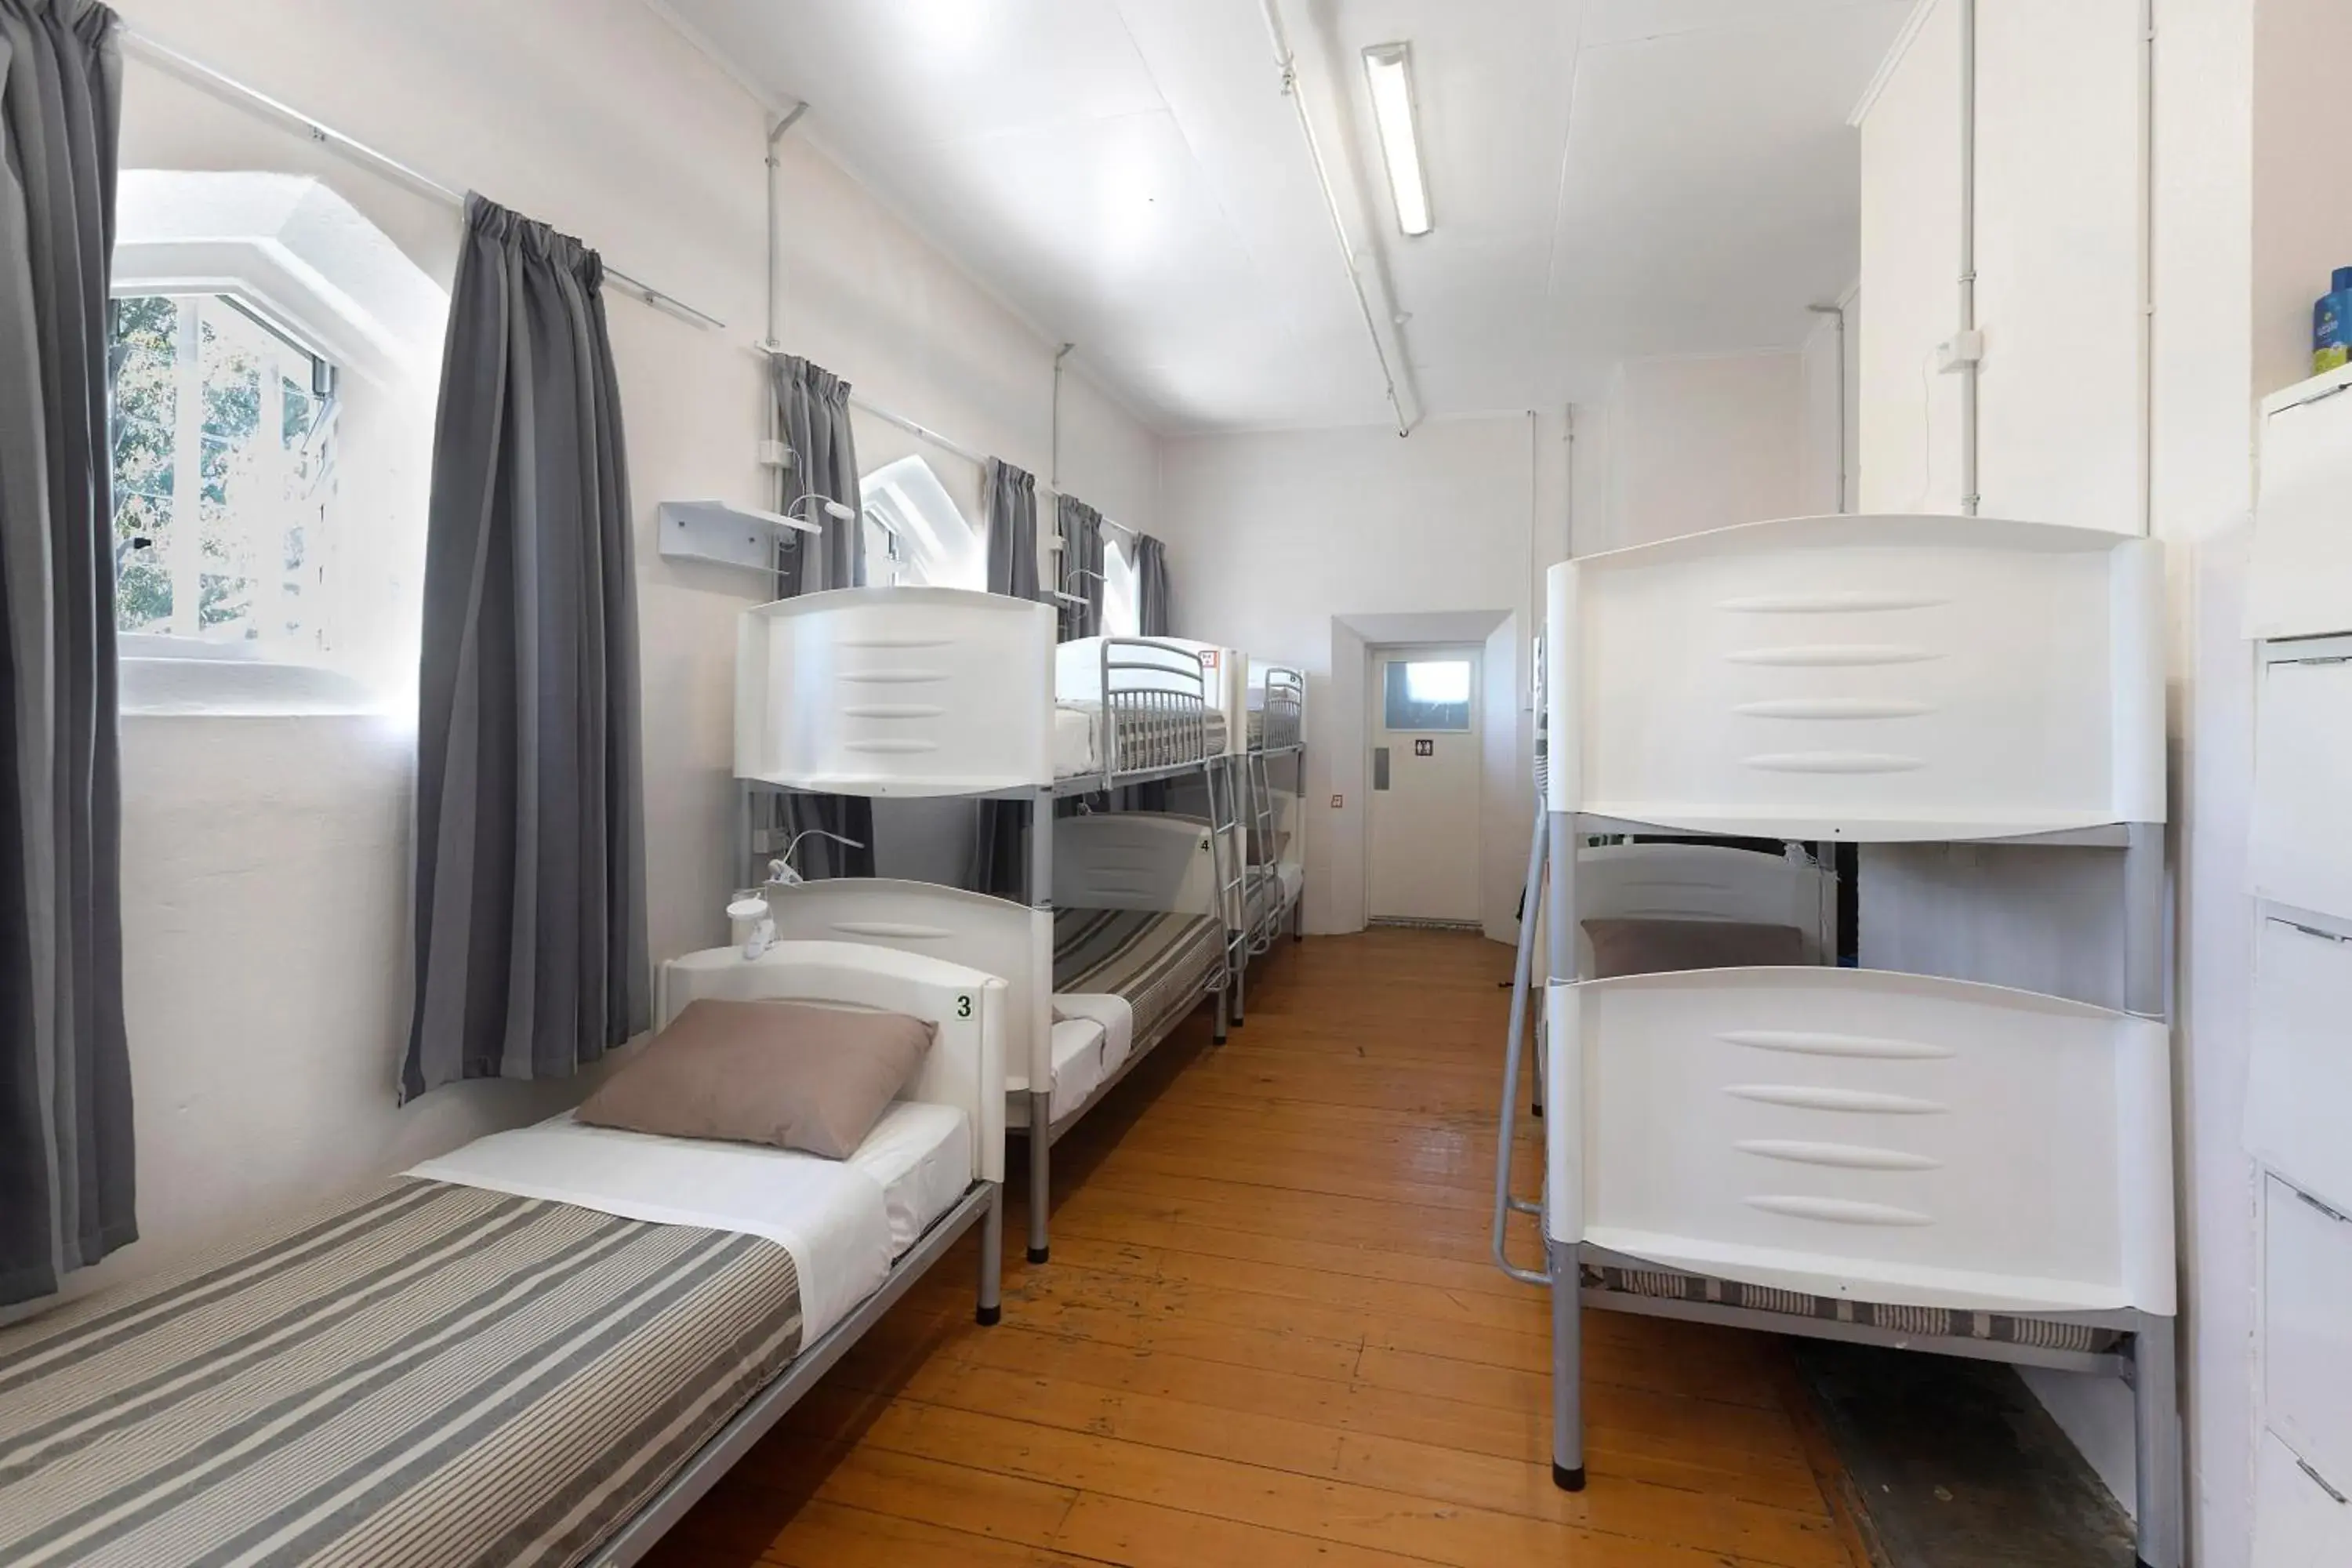 Bedroom, Bunk Bed in Jailhouse Accommodation